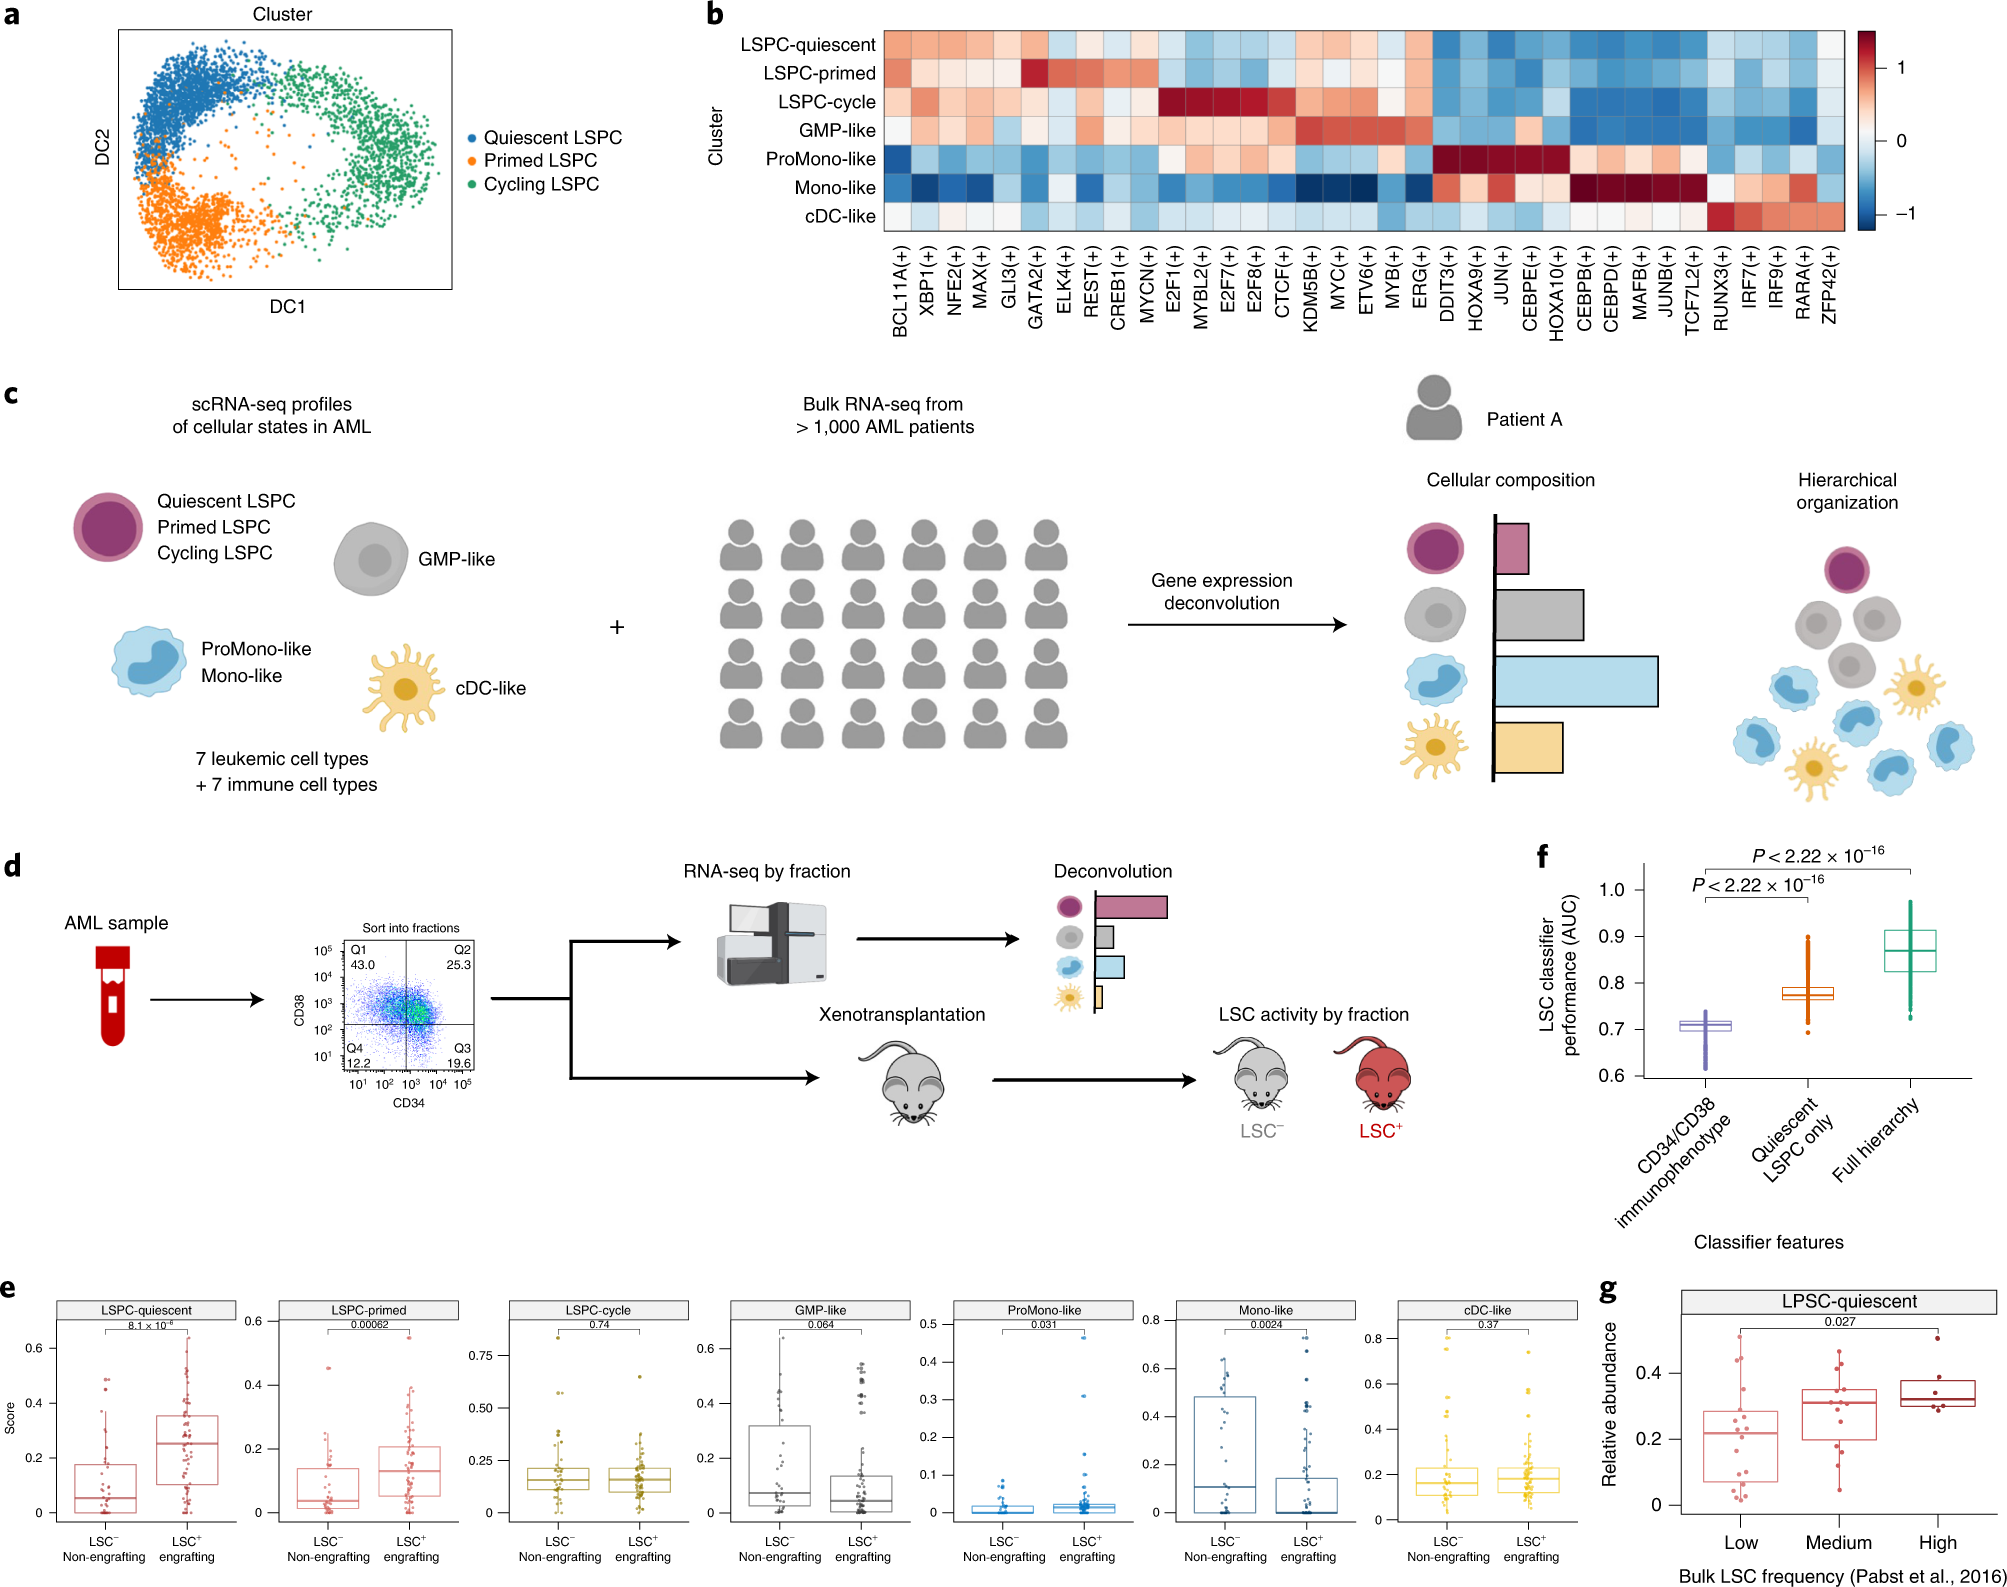 A cellular hierarchy framework for understanding heterogeneity and  predicting drug response in acute myeloid leukemia | Nature Medicine